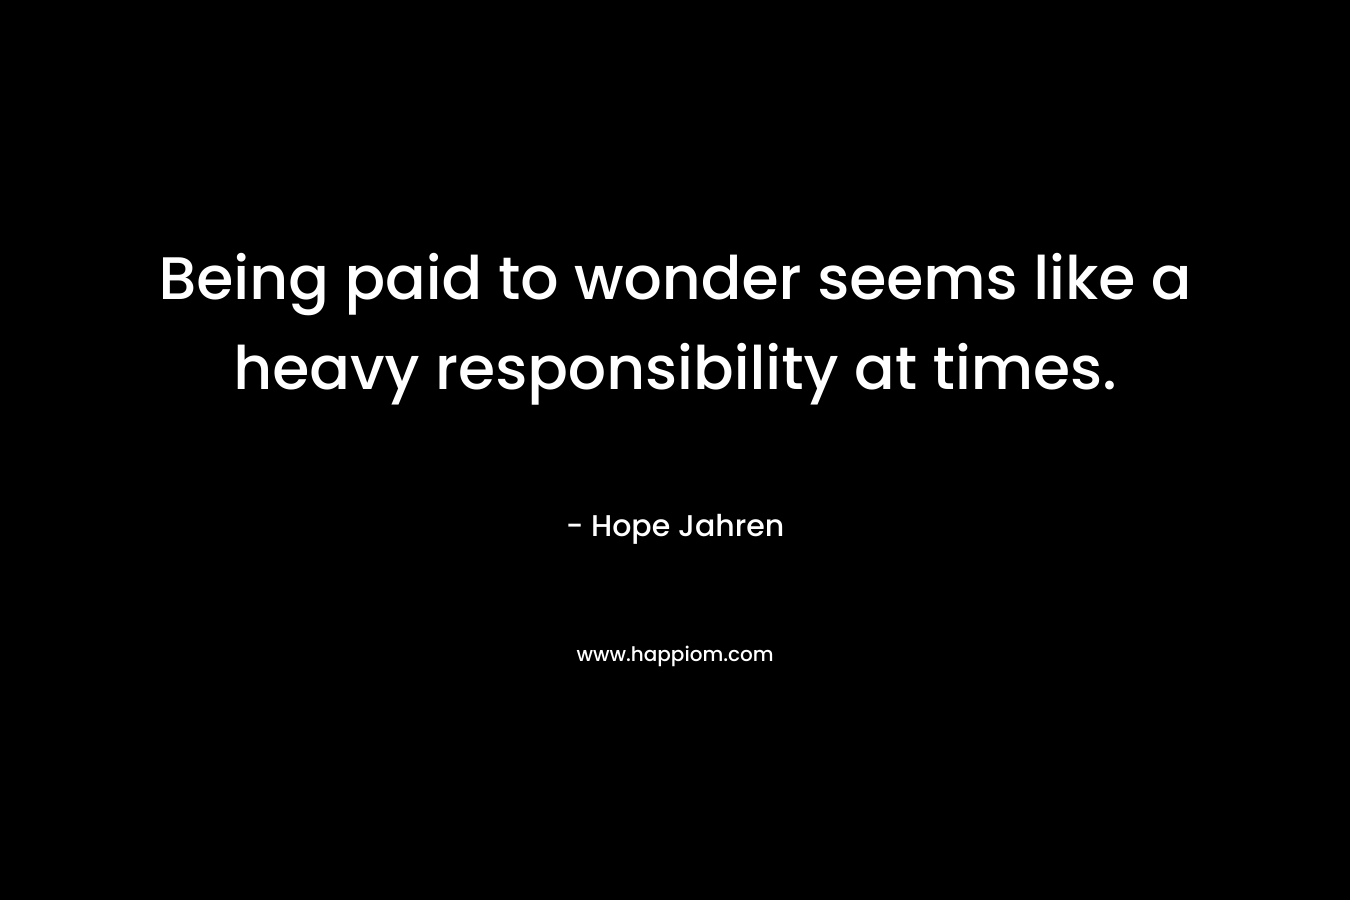 Being paid to wonder seems like a heavy responsibility at times.